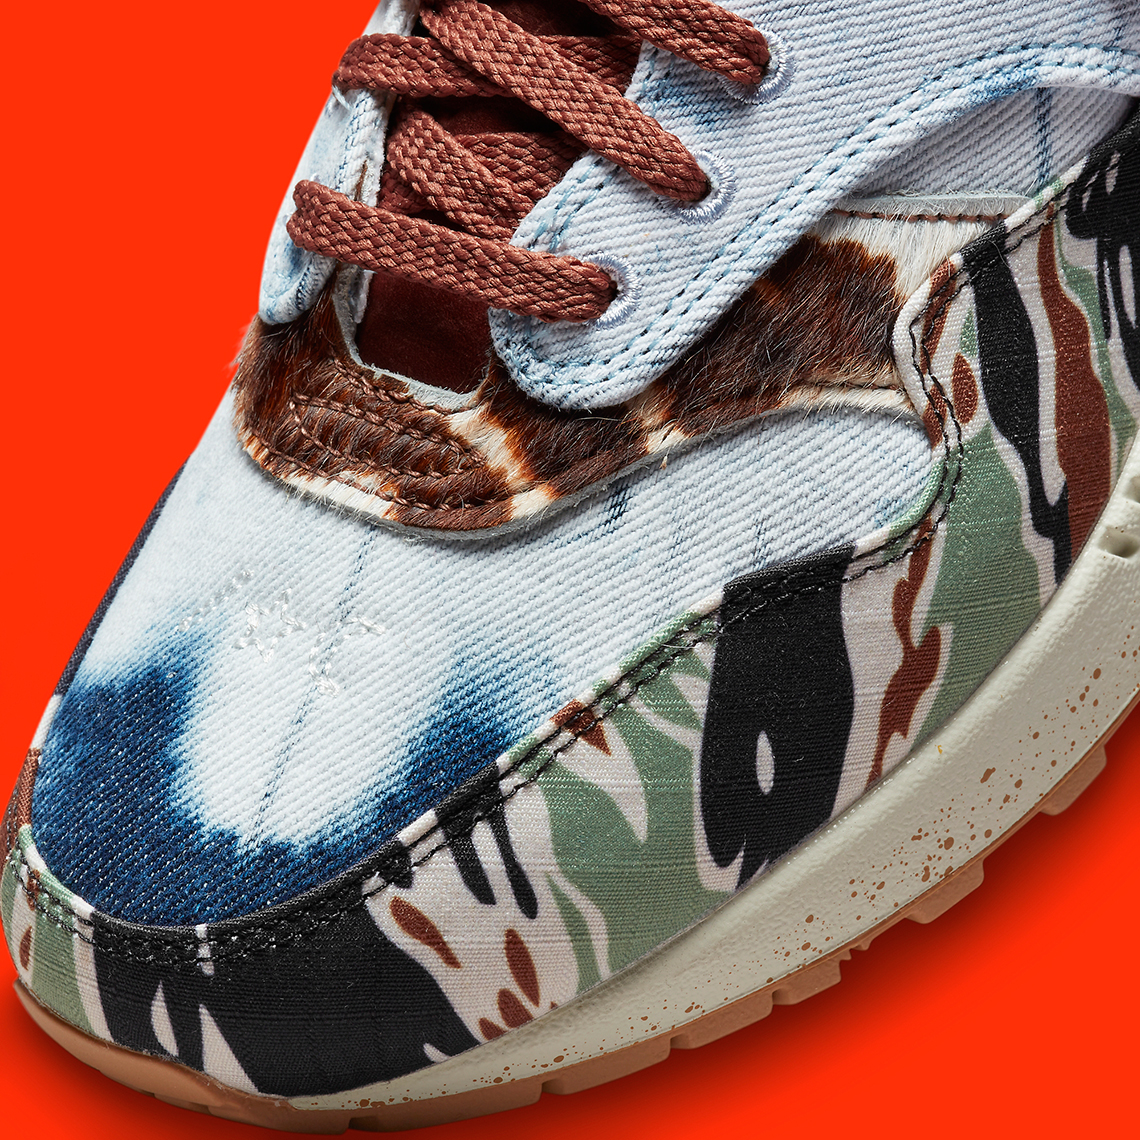 Concepts Nike Air Max 1 Camo Dn1803 900 Release Date 11